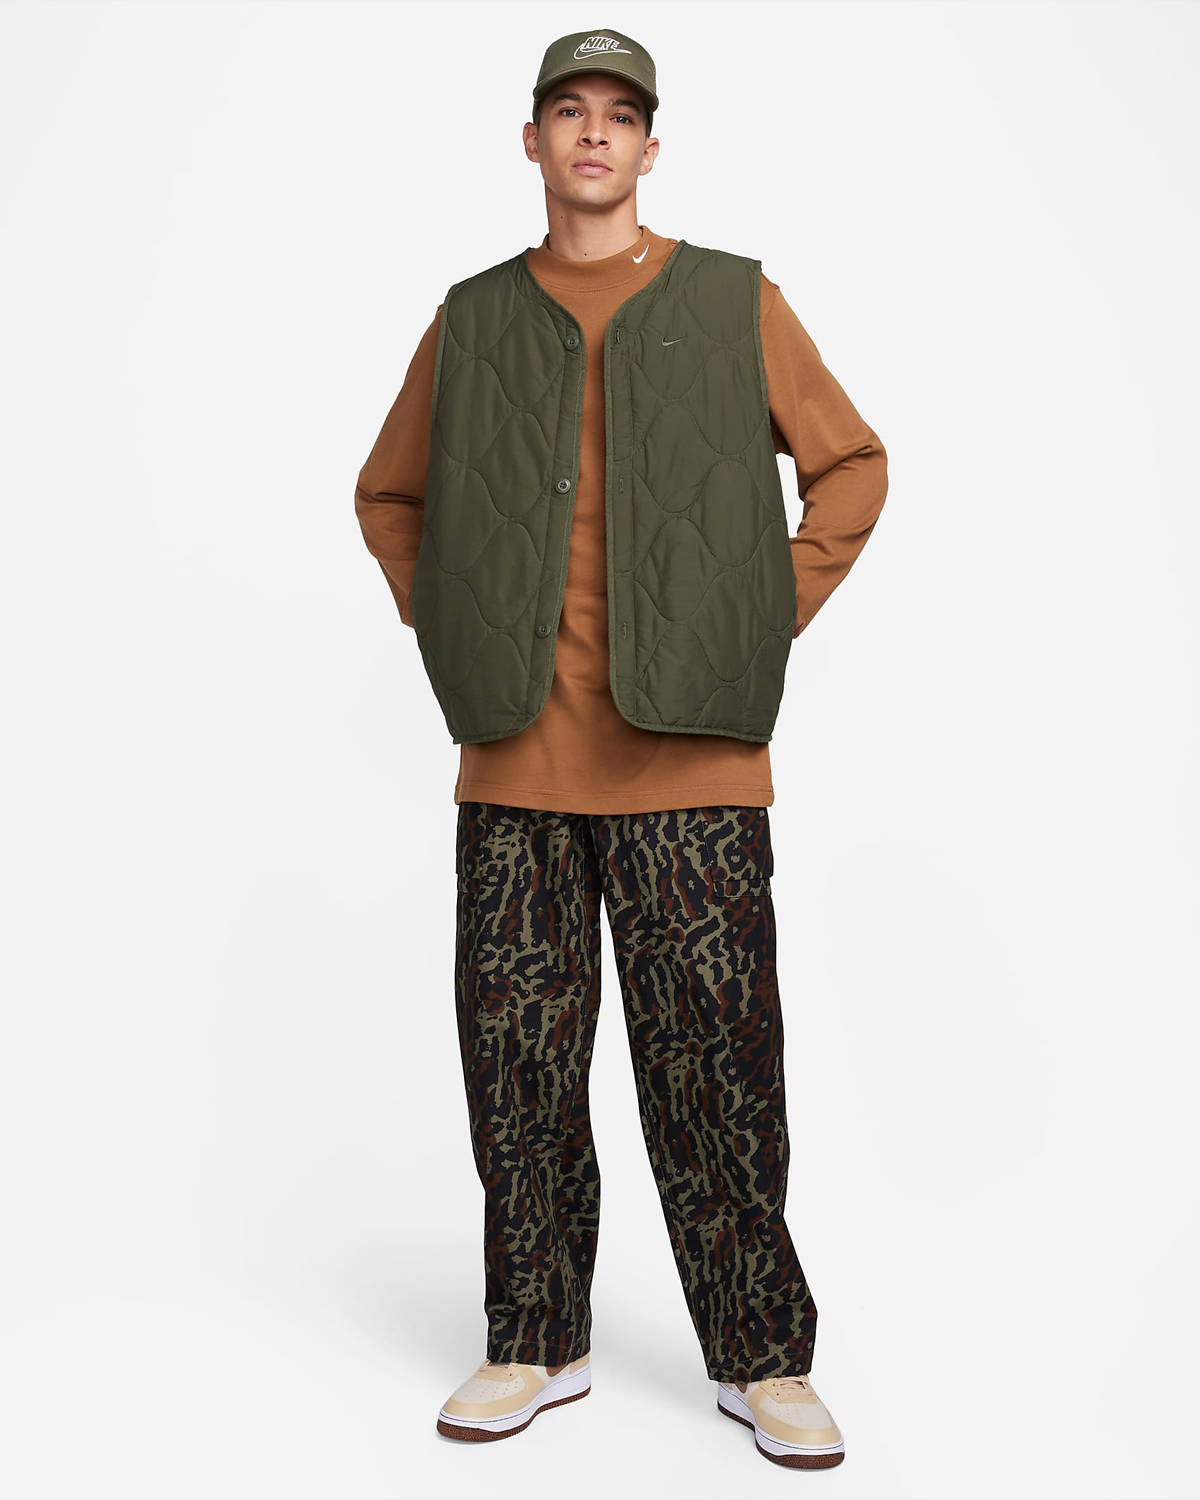 Nike-Life-Allover-Print-Cargo-Pants-Medium-Olive-Outfit